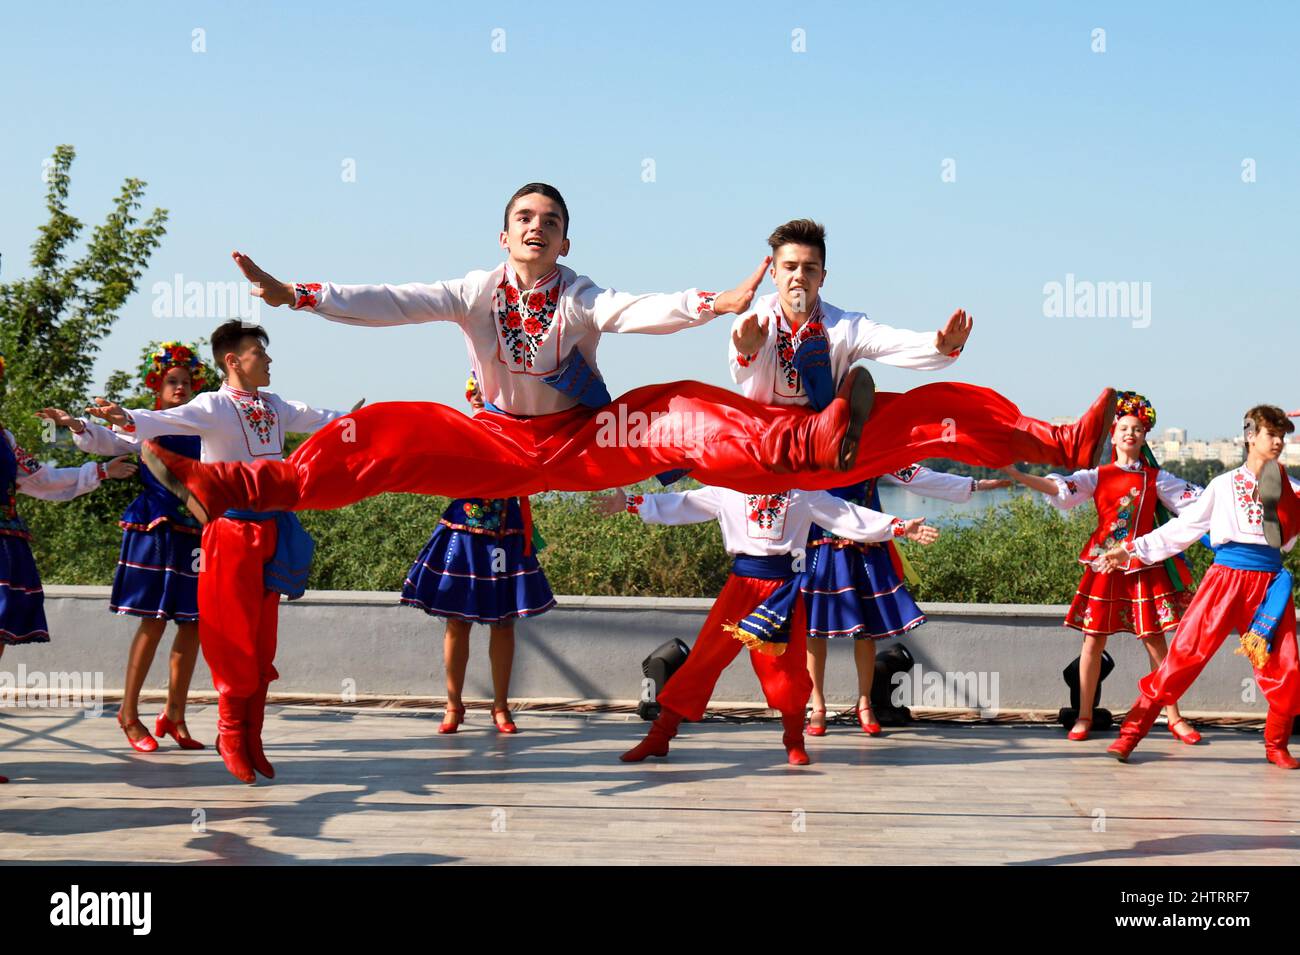 Young people in national Ukrainian costumes dance on Independence Day, Ukraine. Guys in national costumes, embroidered shirts jump high in dance. Patr Stock Photo